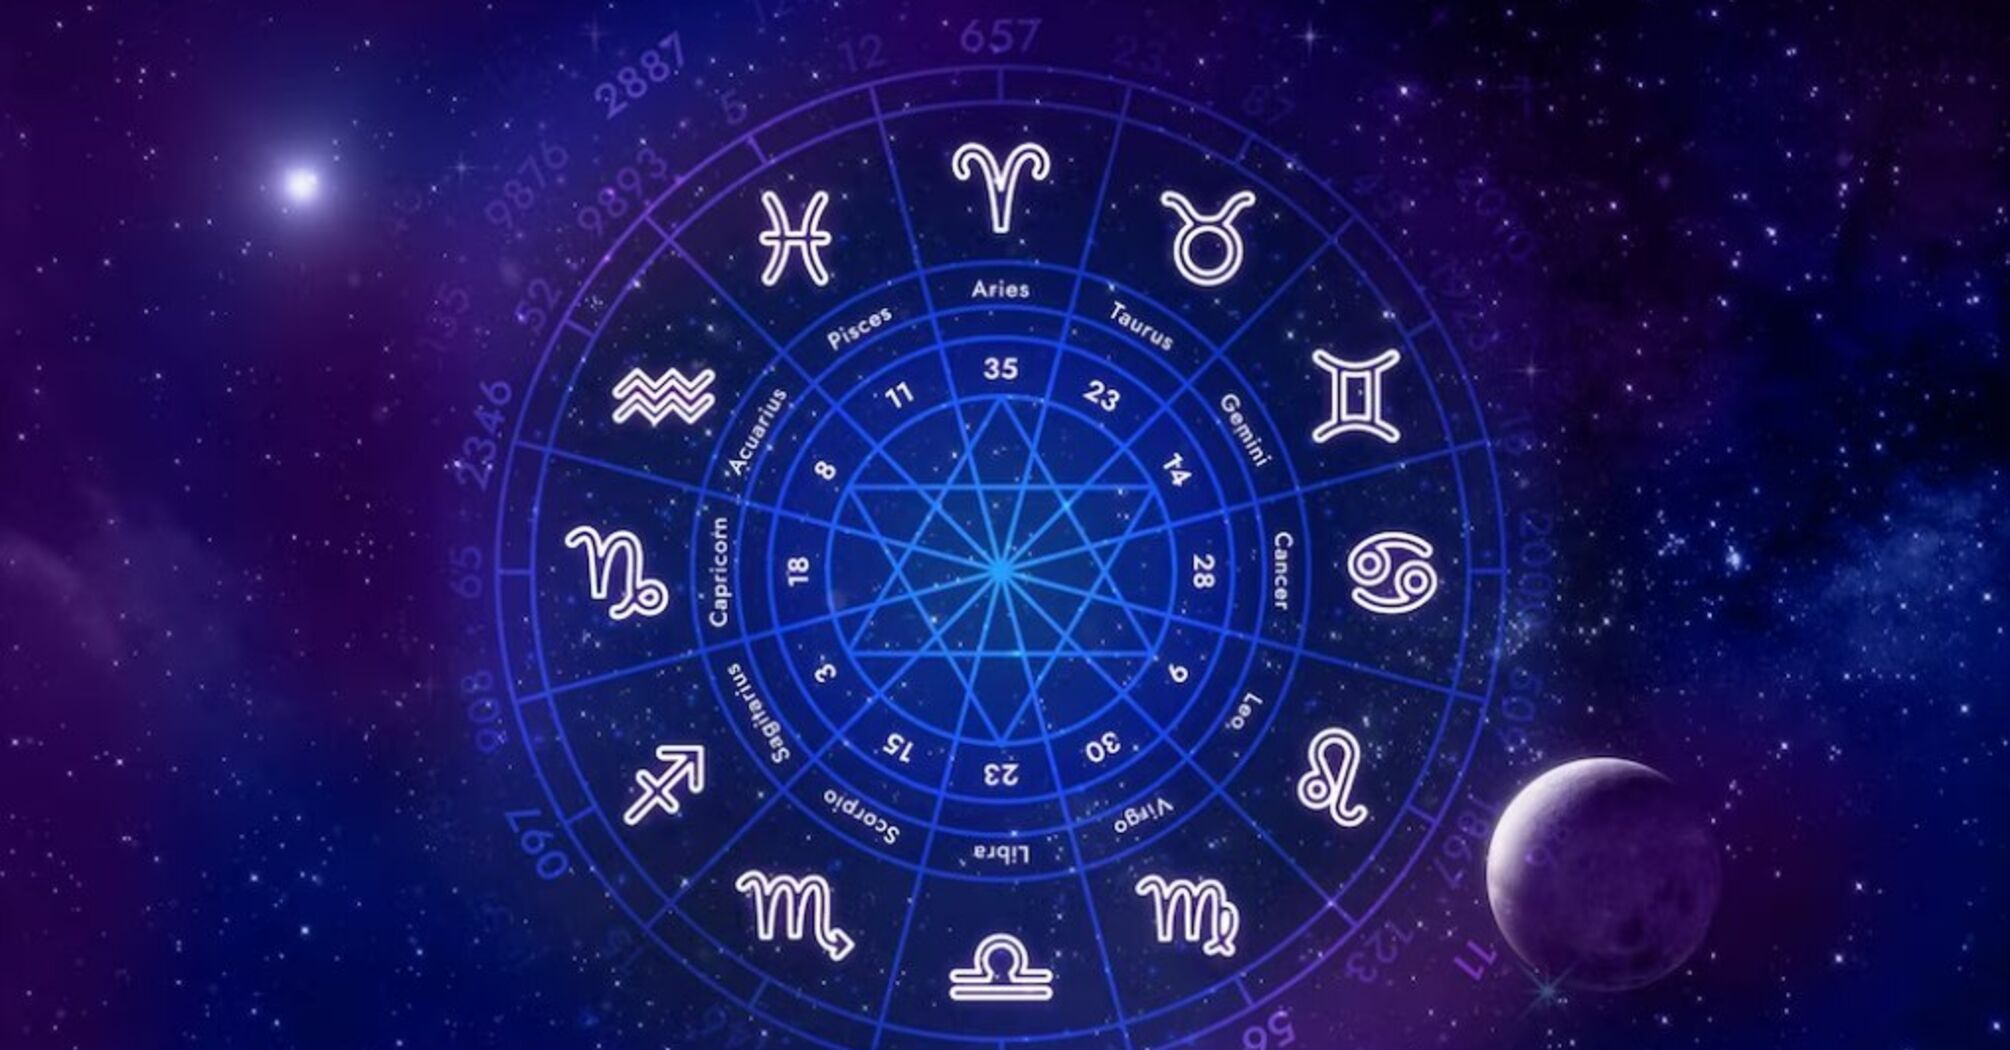 These zodiac signs will have good career prospects this week